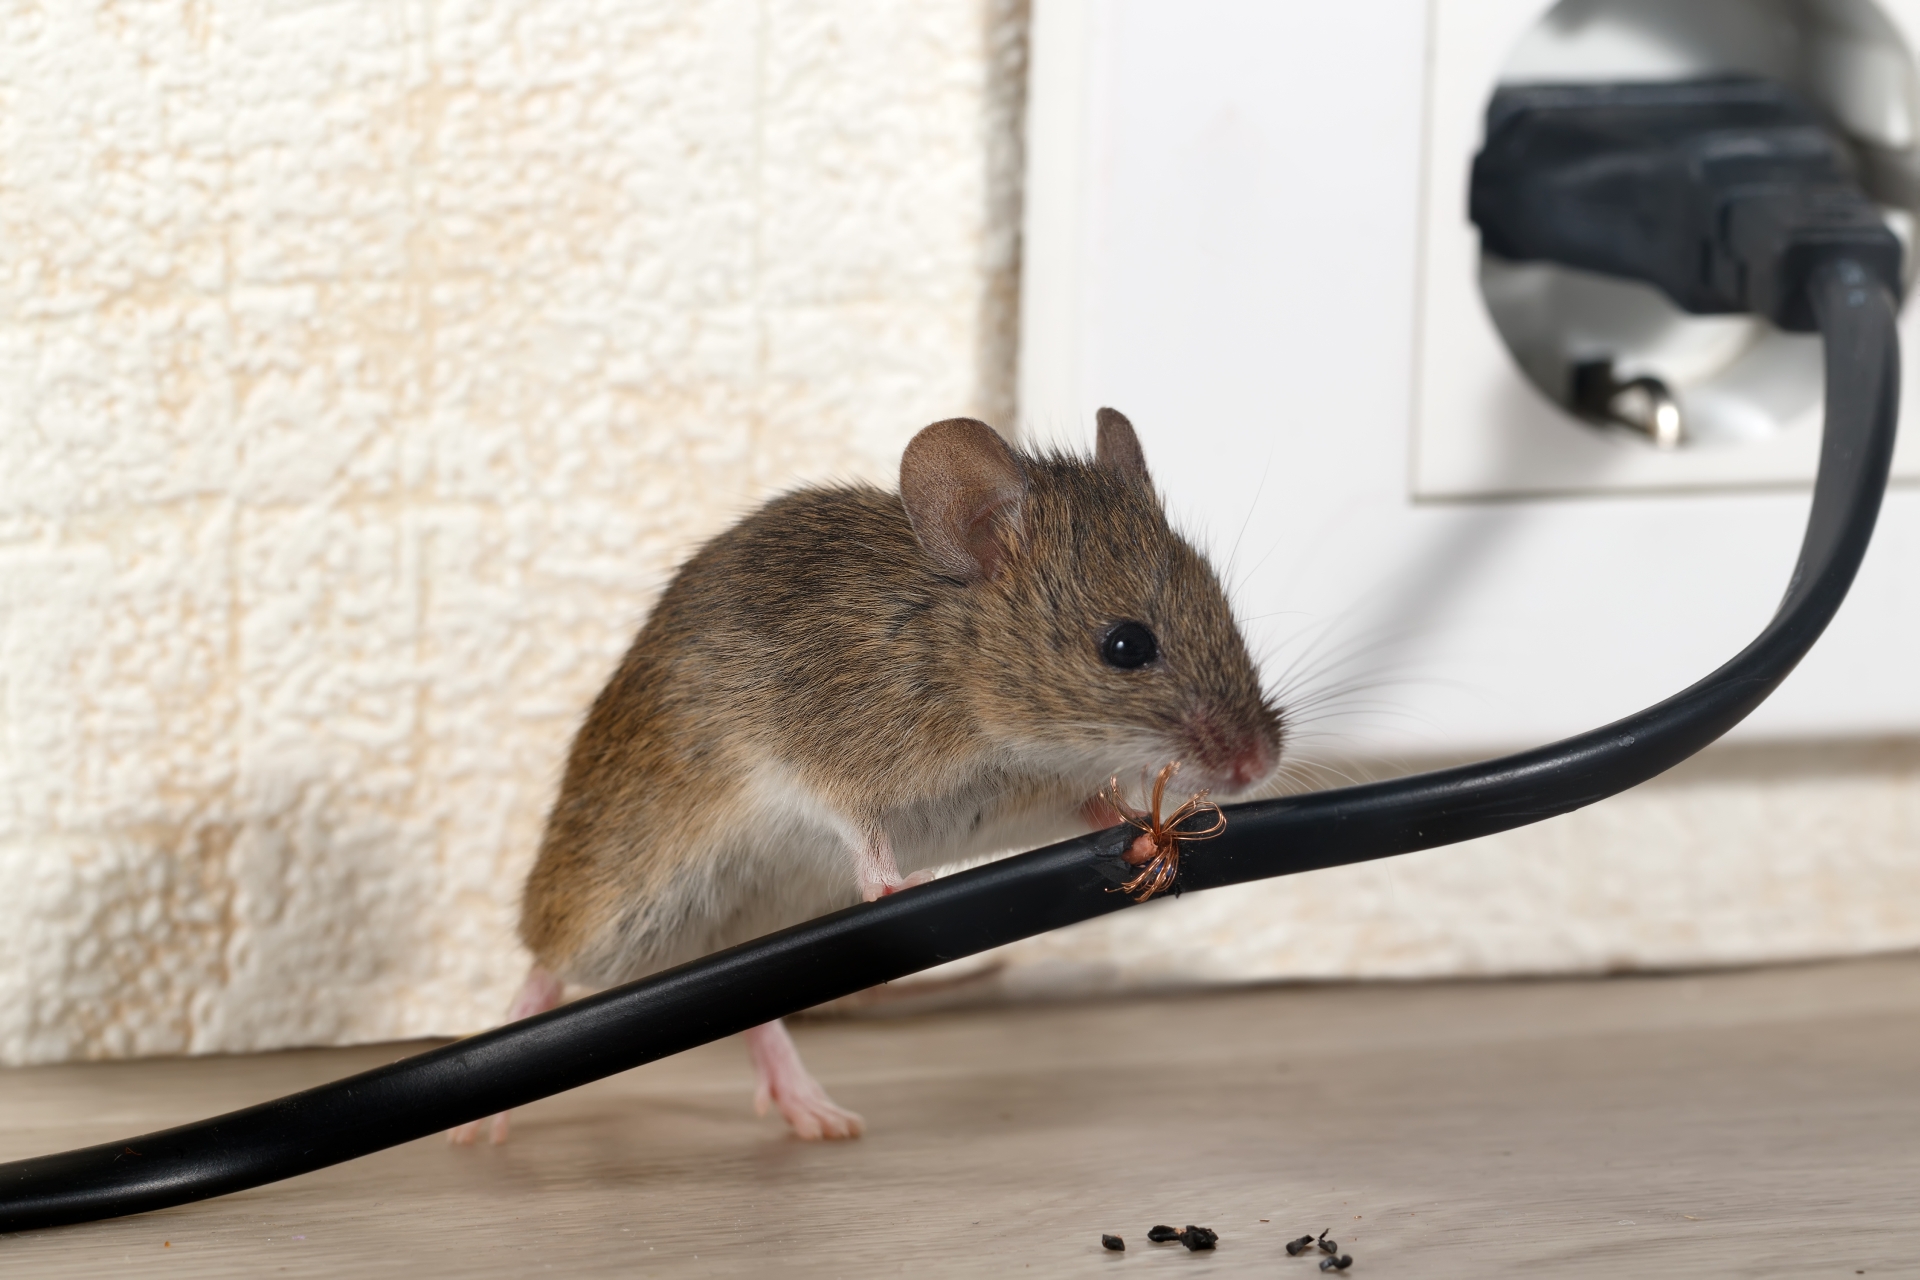 Mice Infestation, Pest Control in Canning Town, North Woolwich, E16. Call Now 020 8166 9746